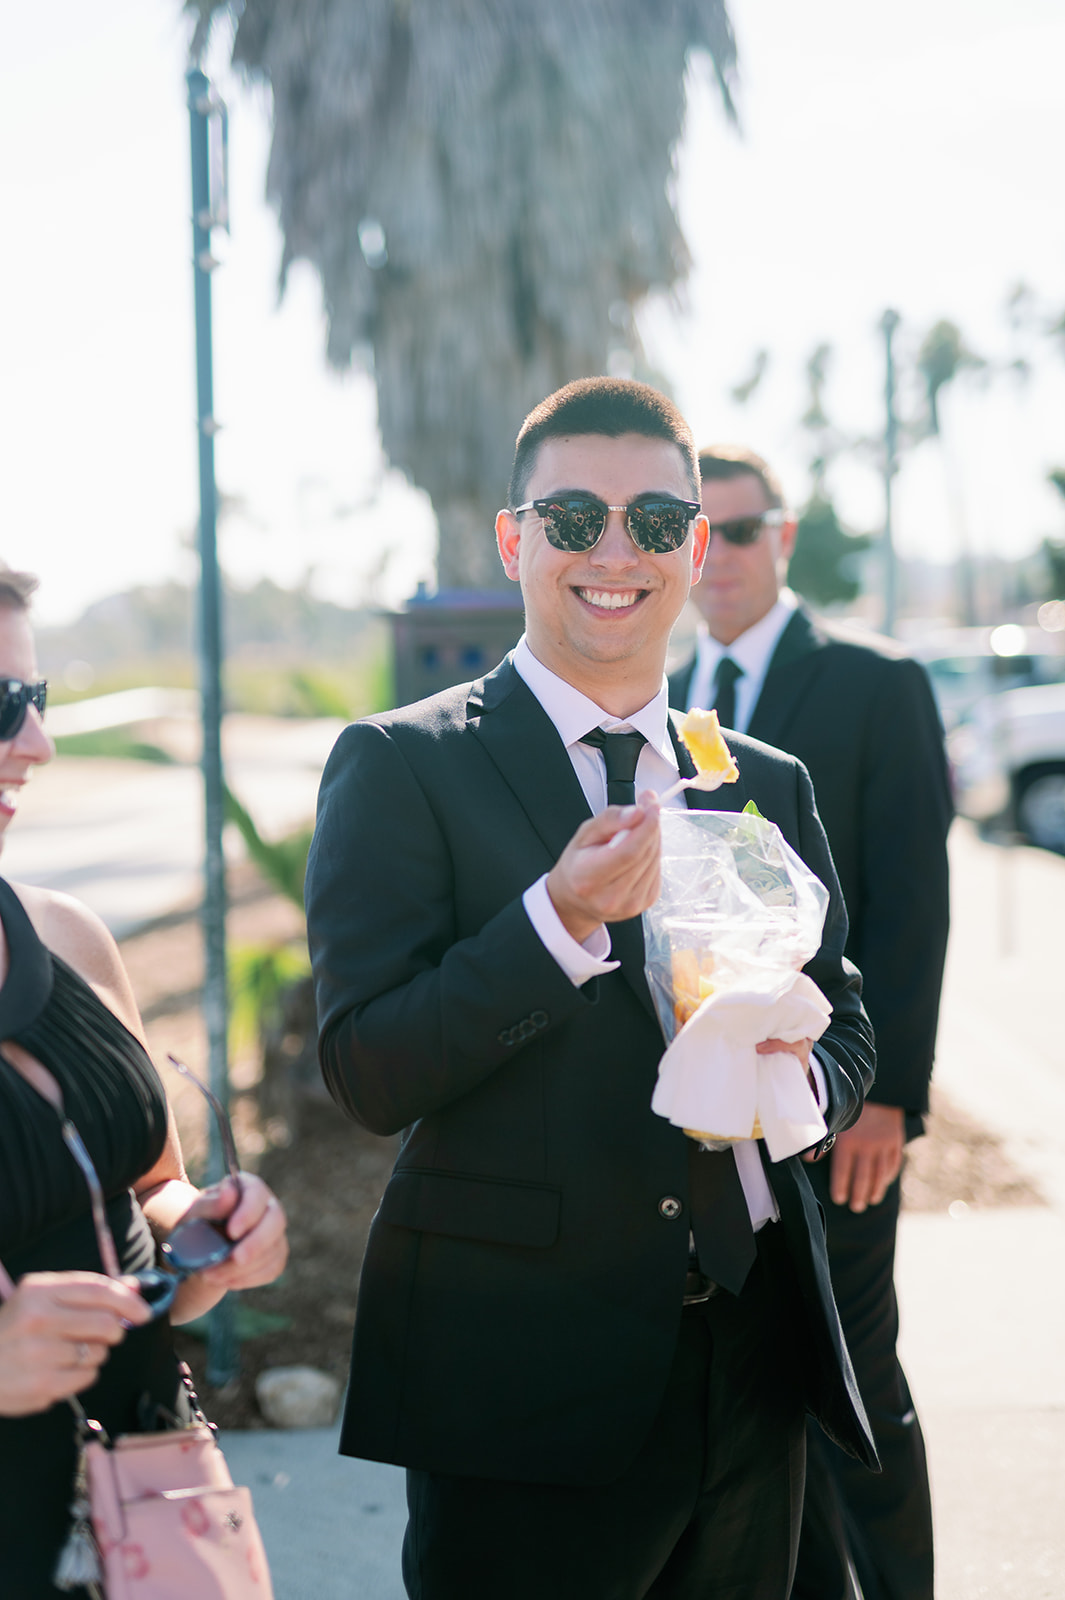 Wedding guest eating fruit and wearing sunglasses. 